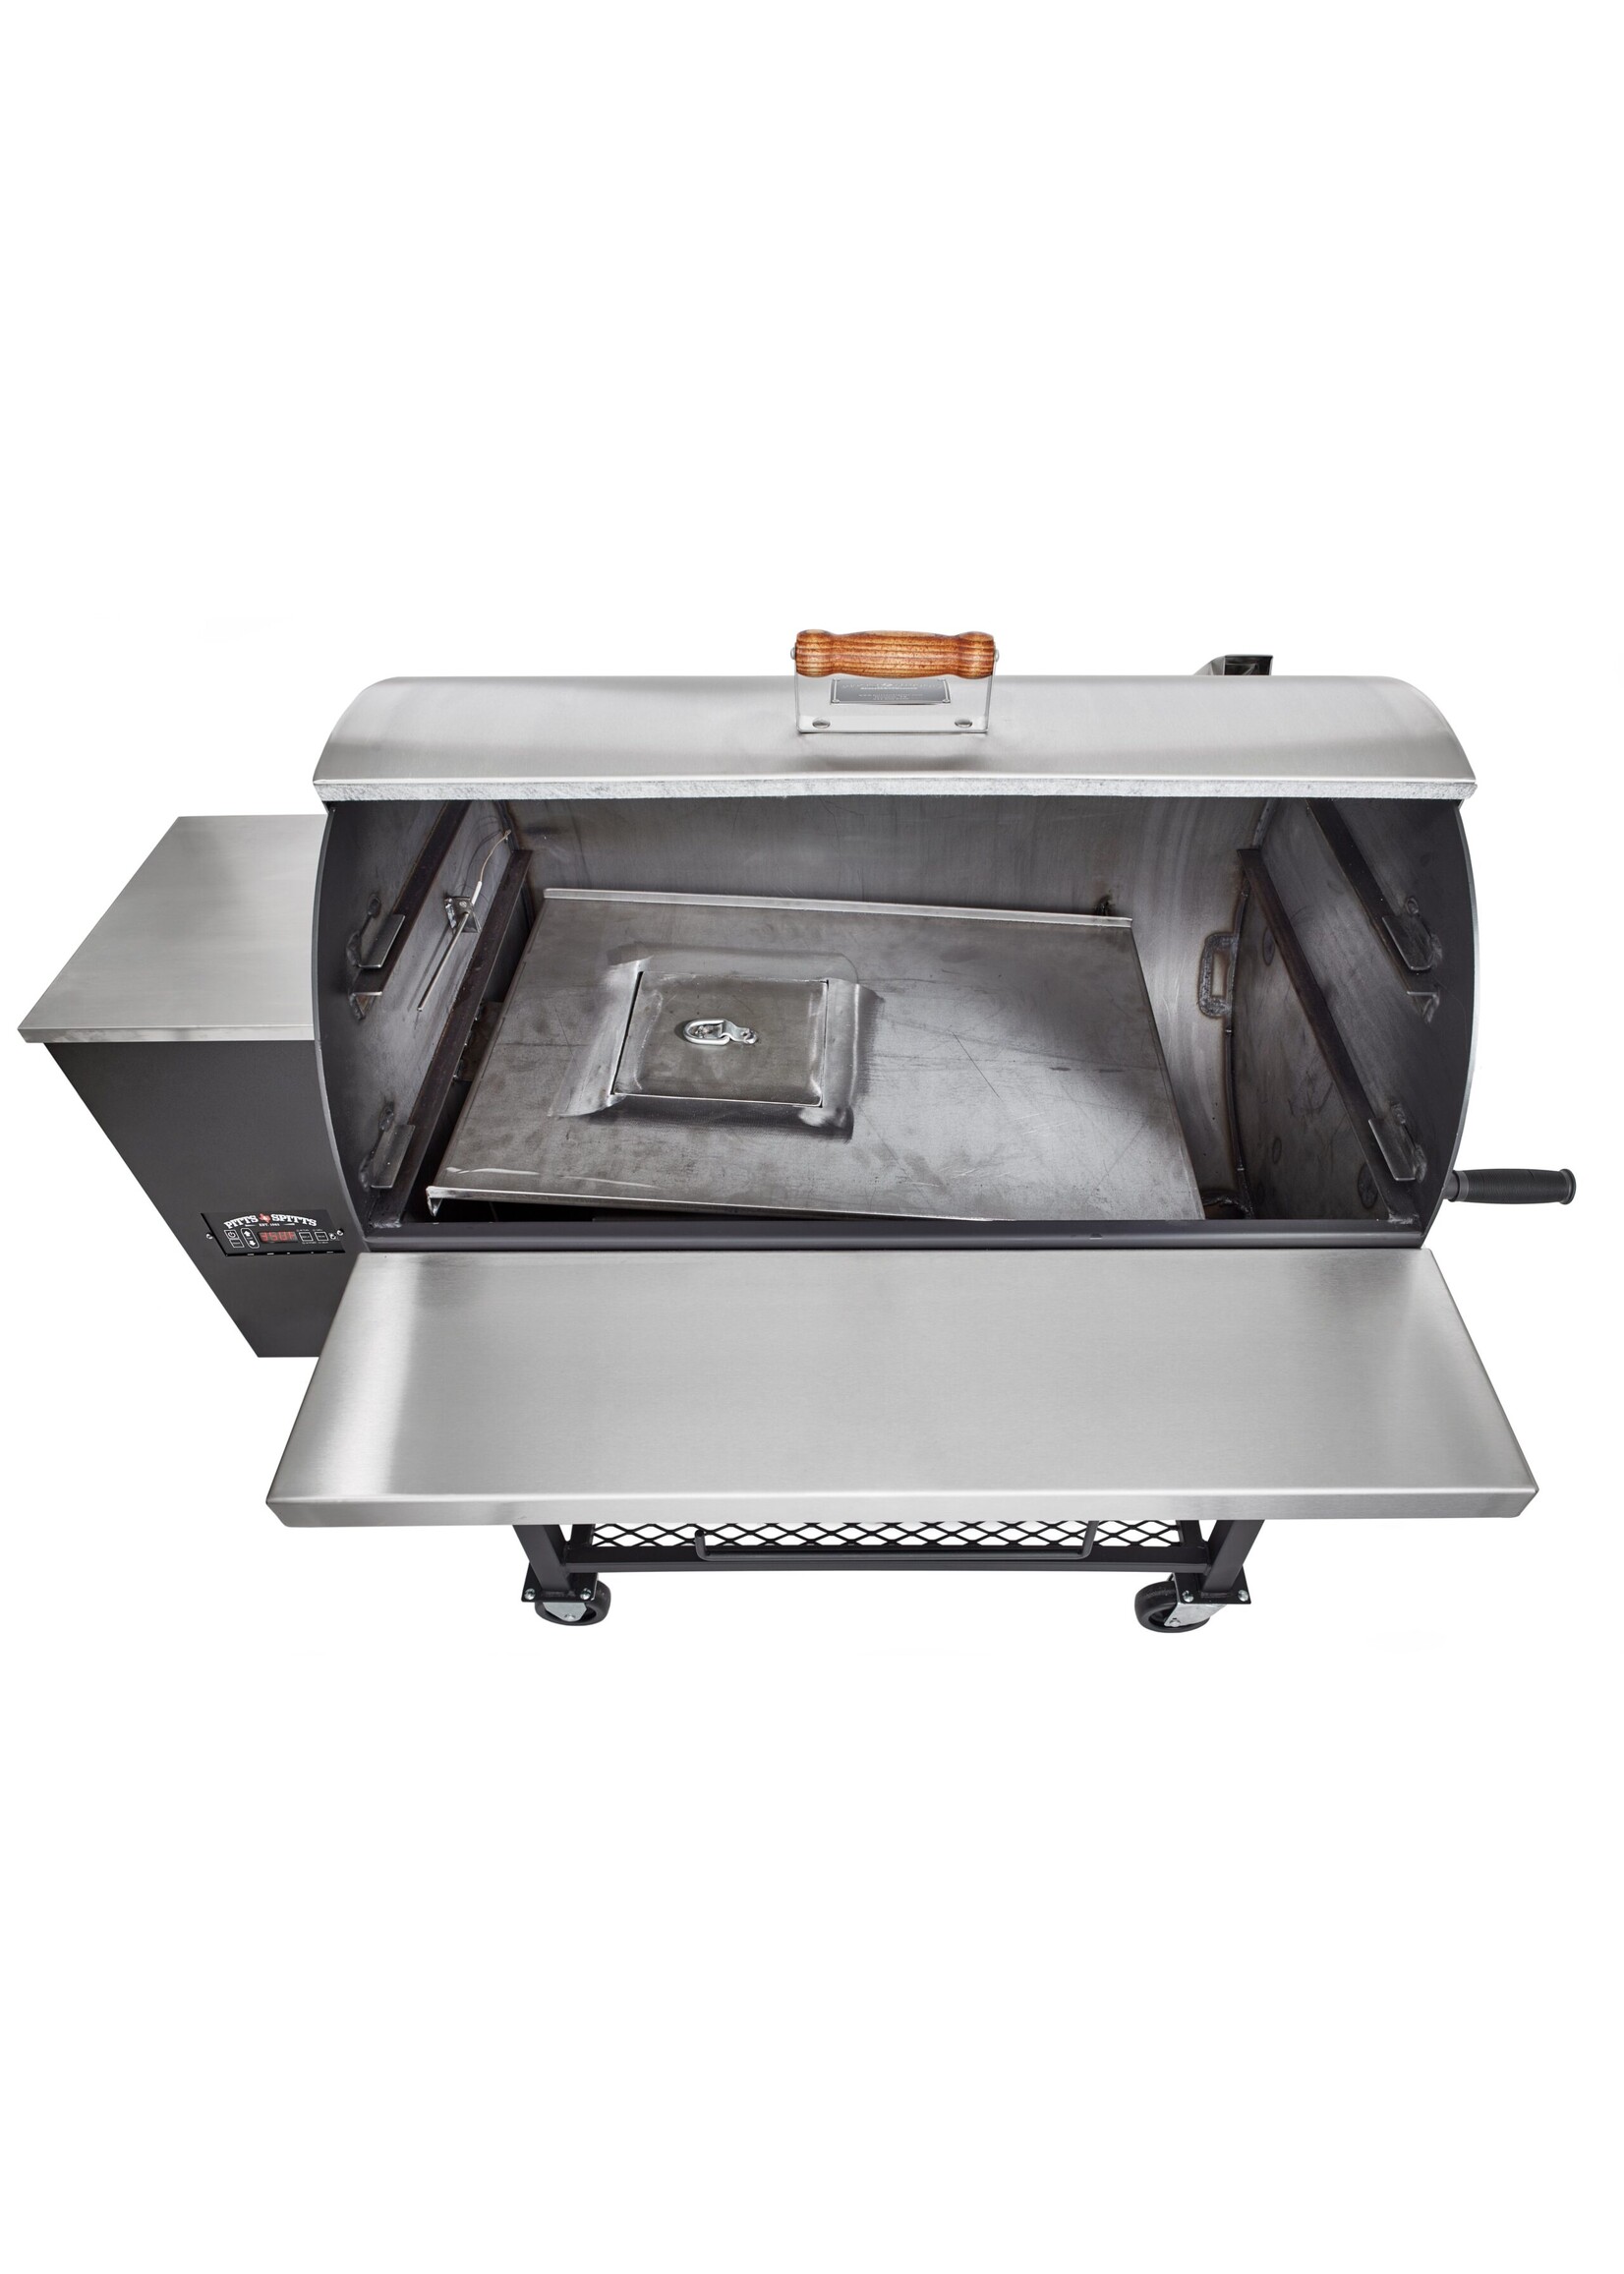 Pitts & Spitts Pitts & Spitts Maverick 1250 Pellet Grill w/ 8" Casters